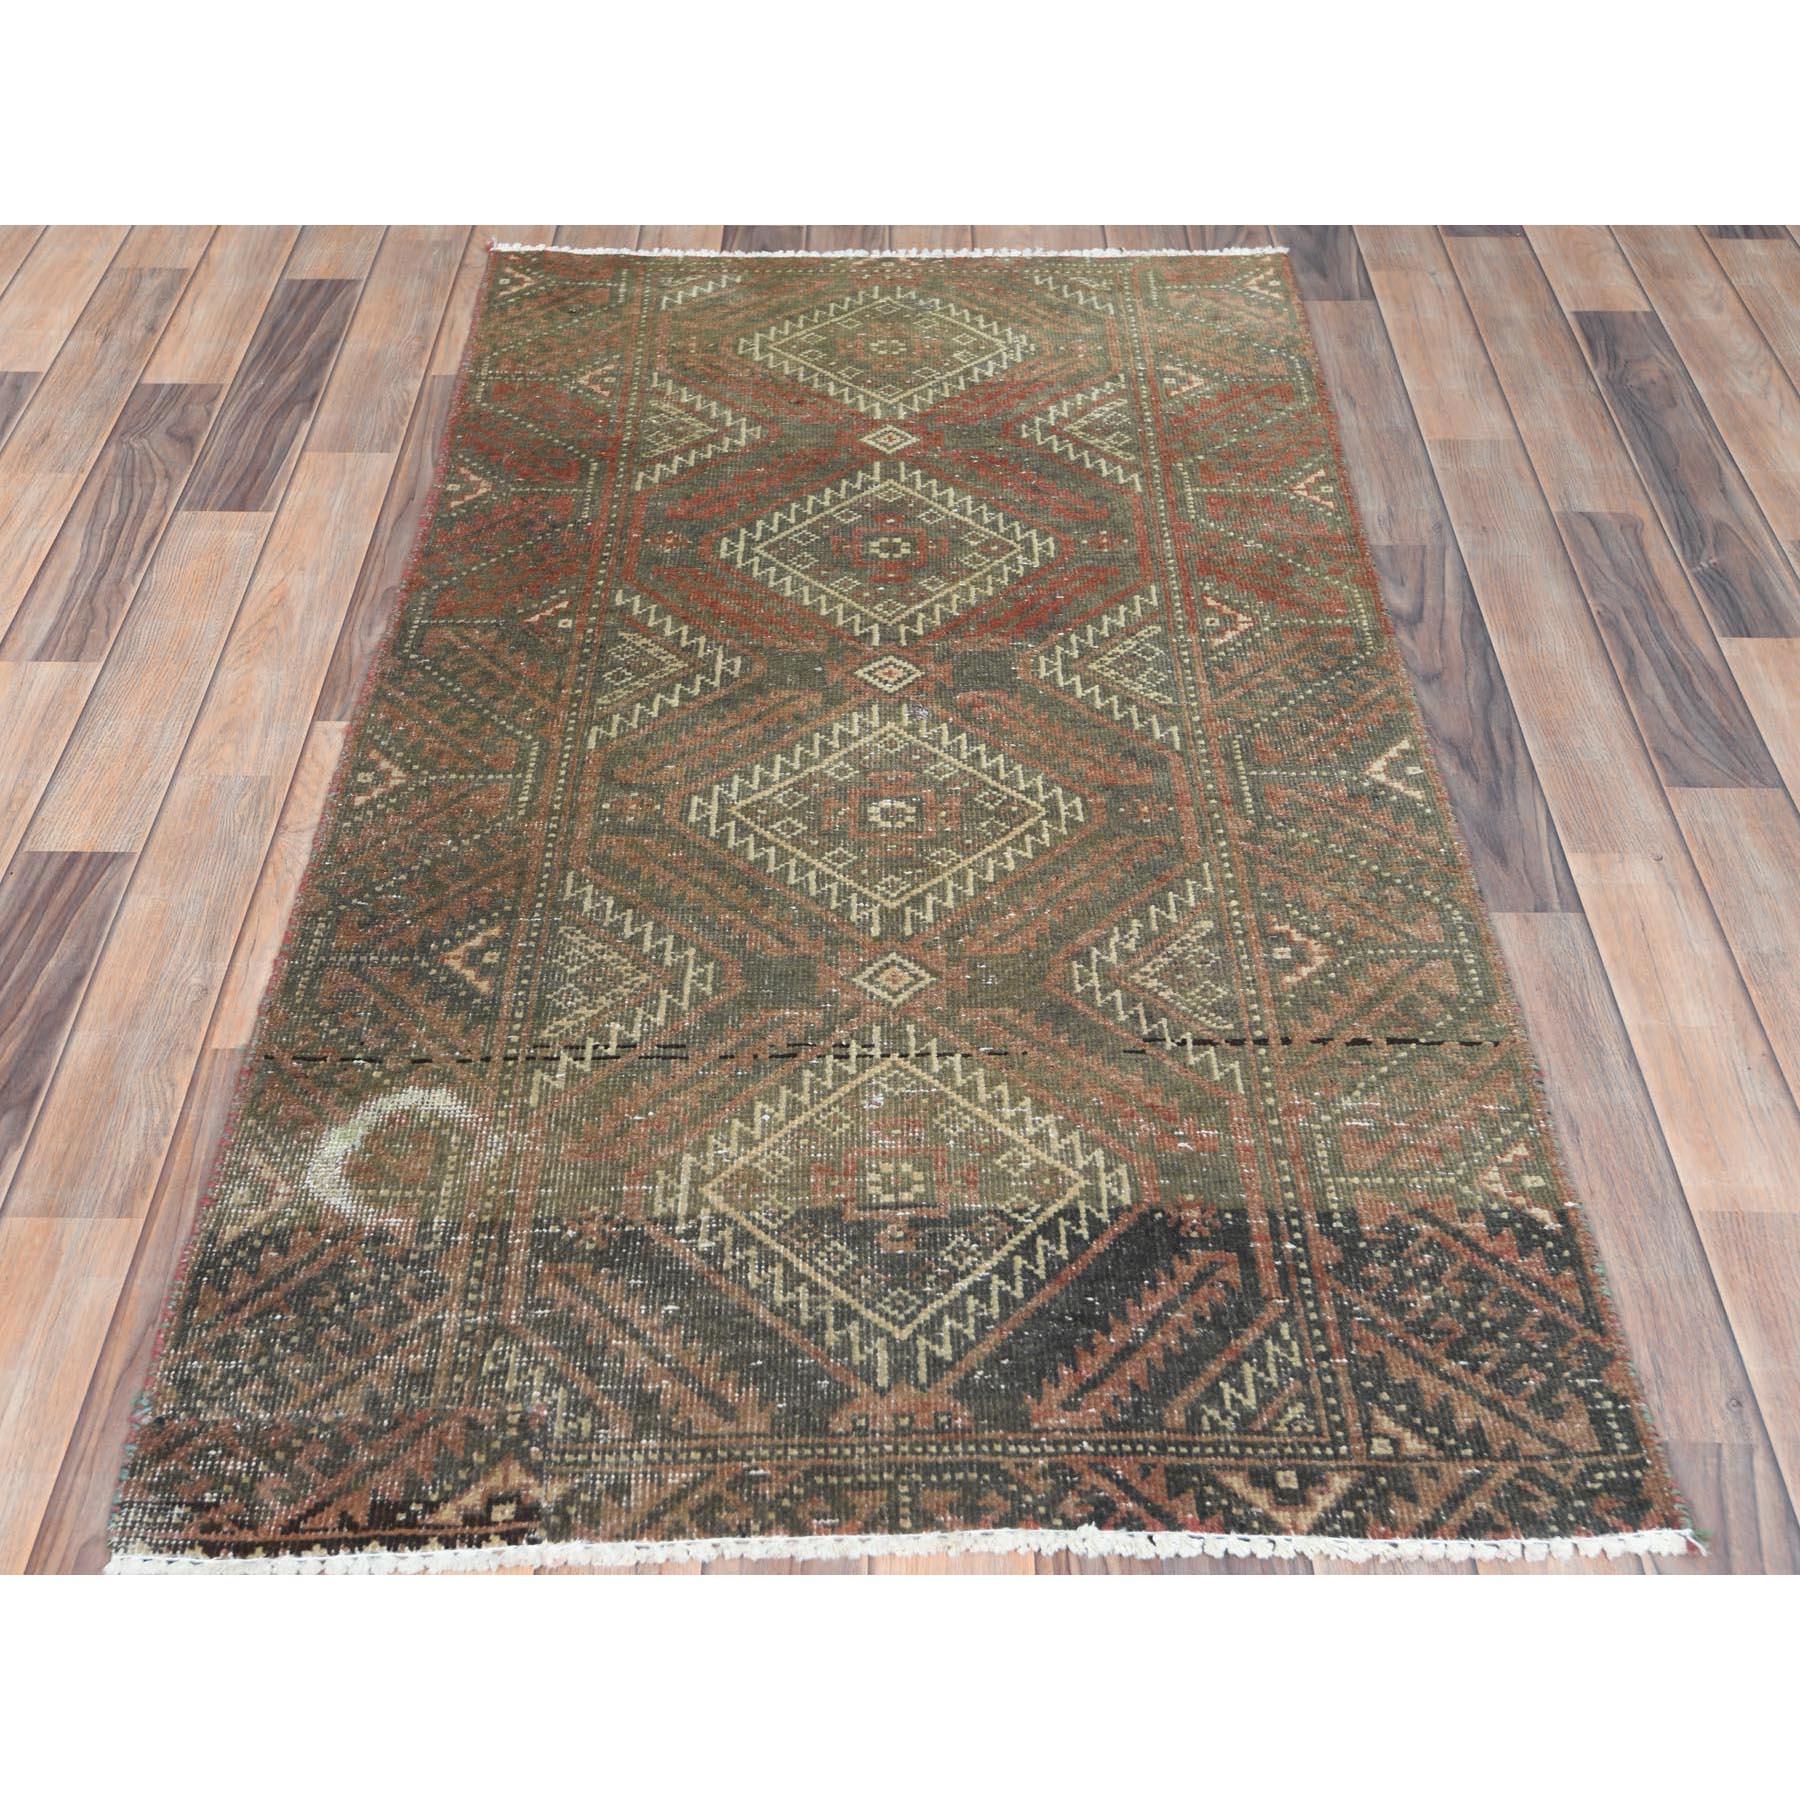 This fabulous hand-knotted carpet has been created and designed for extra strength and durability. This rug has been handcrafted for weeks in the traditional method that is used to make.
exact rug size in feet and inches : 3'0